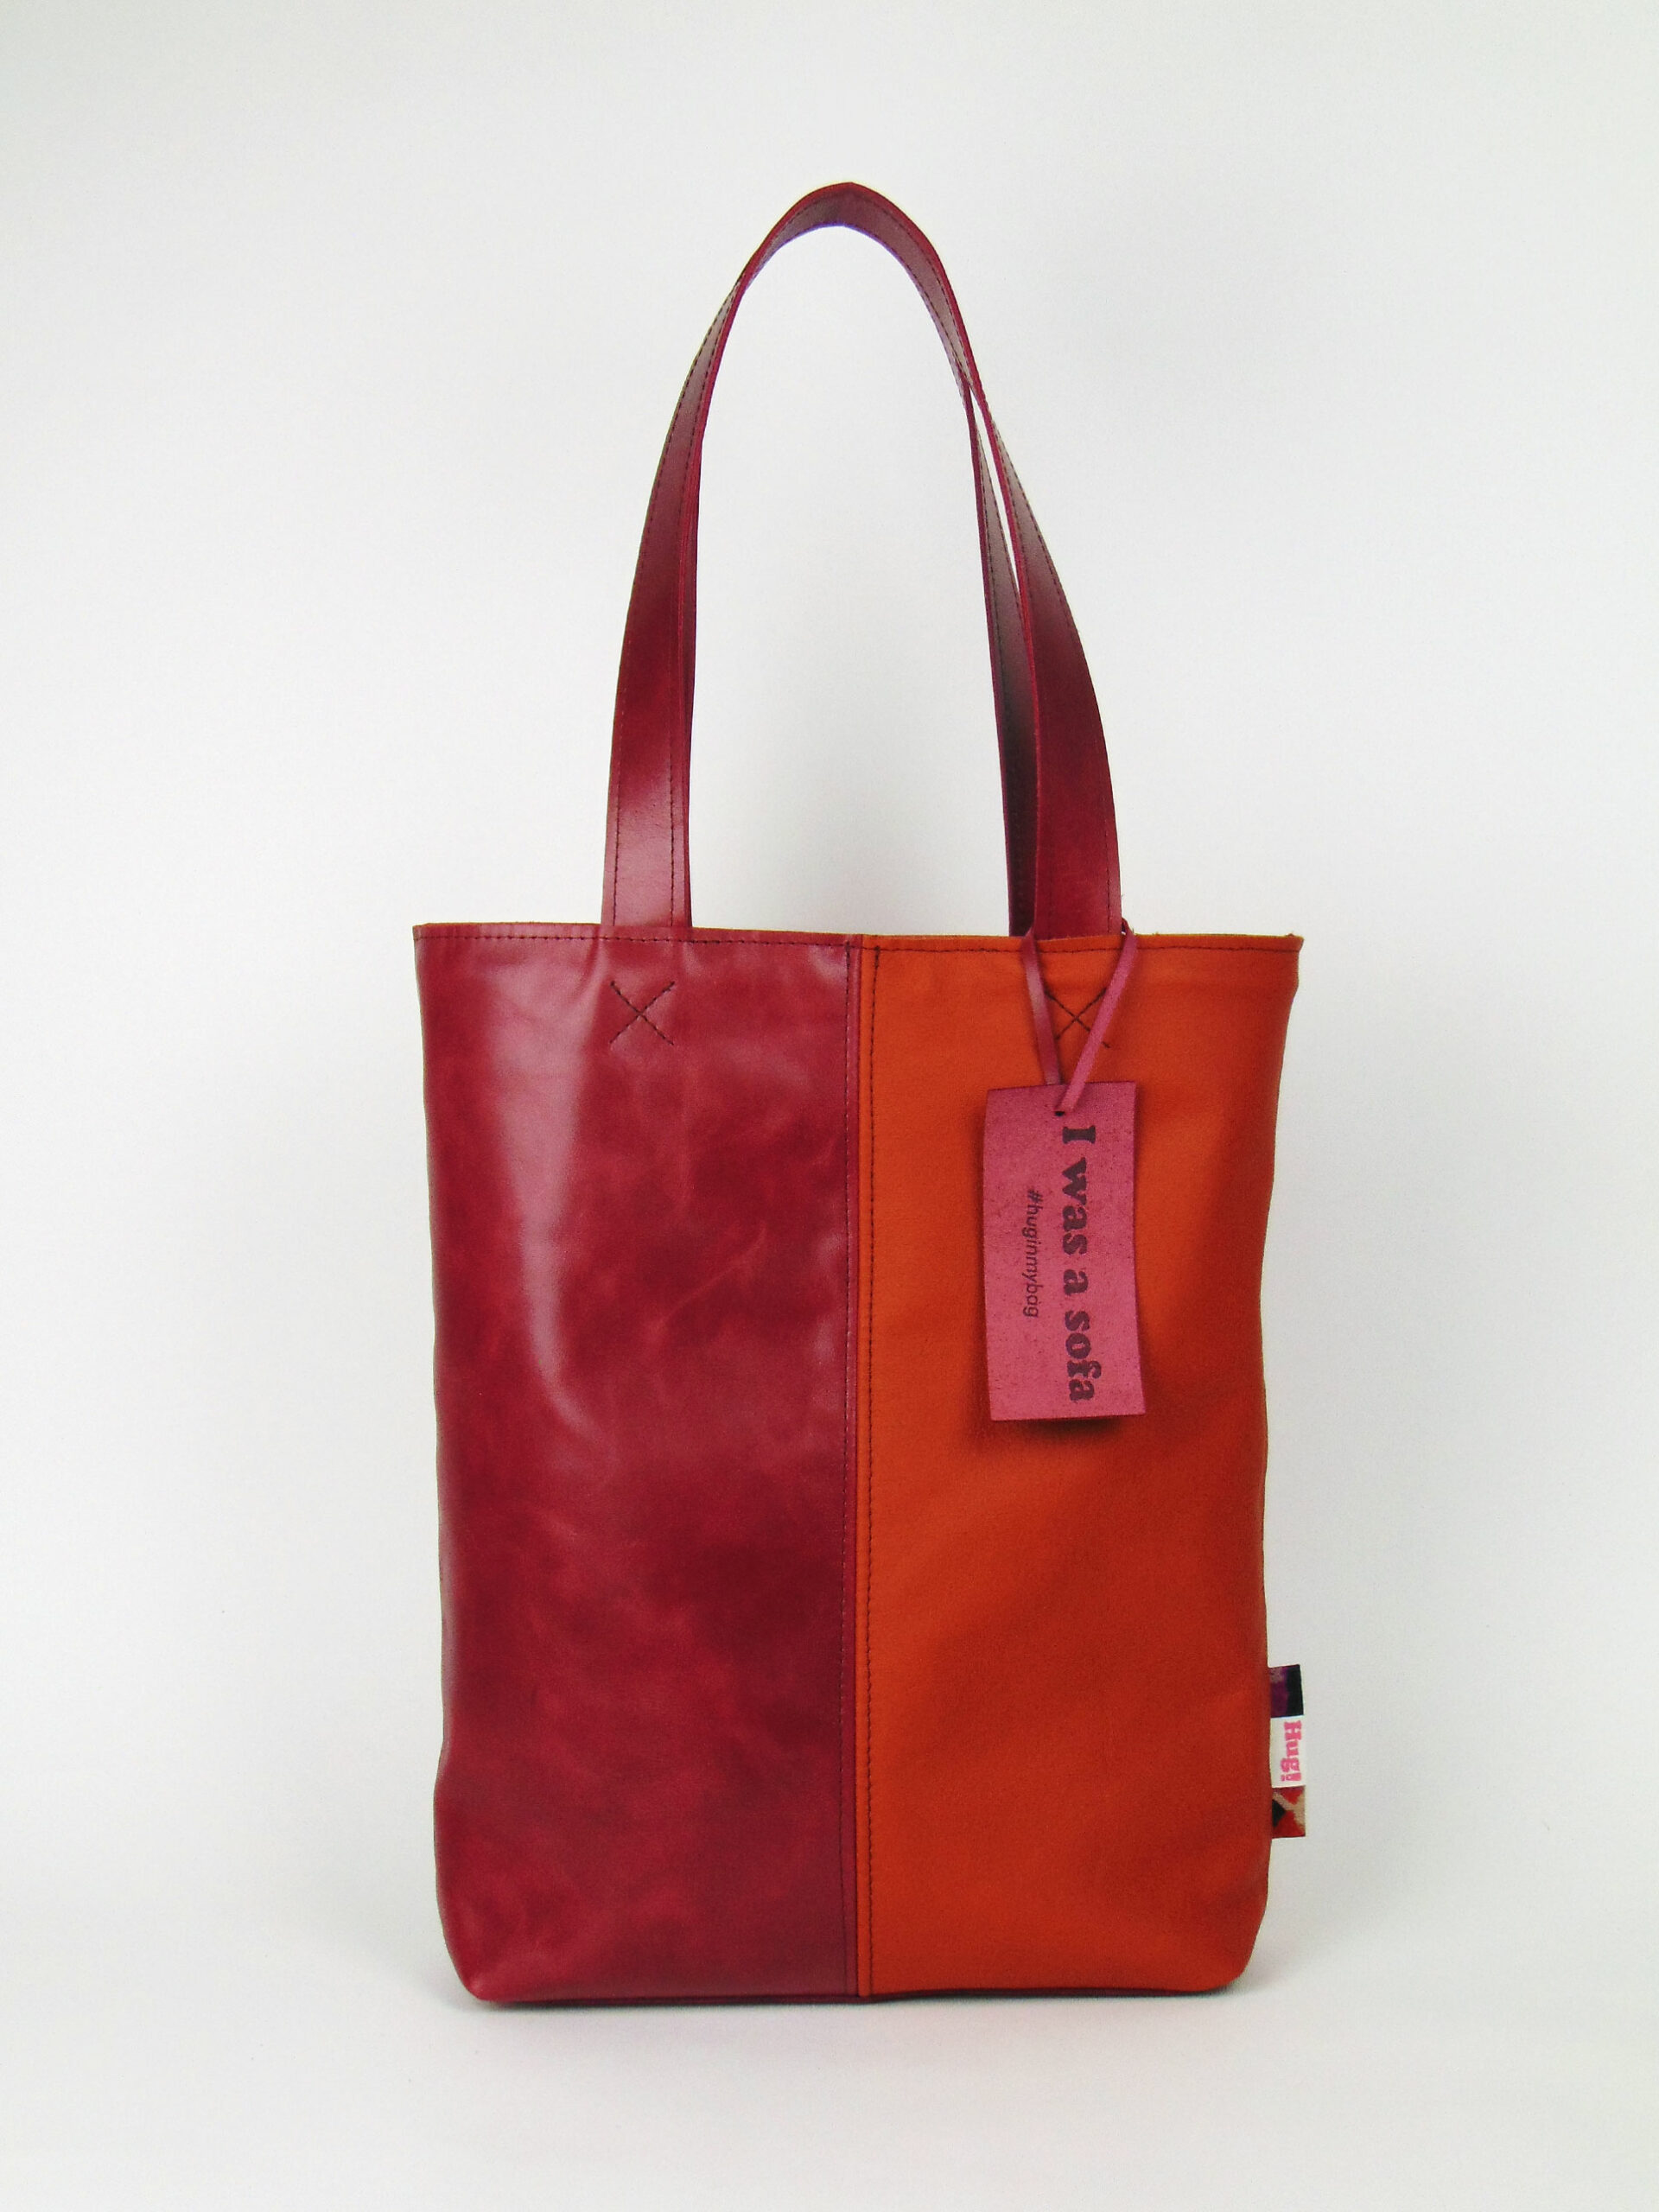 Product image of the shopper named Flower Power. This shopper is made from recycled leather in a colour combination of red and orange.